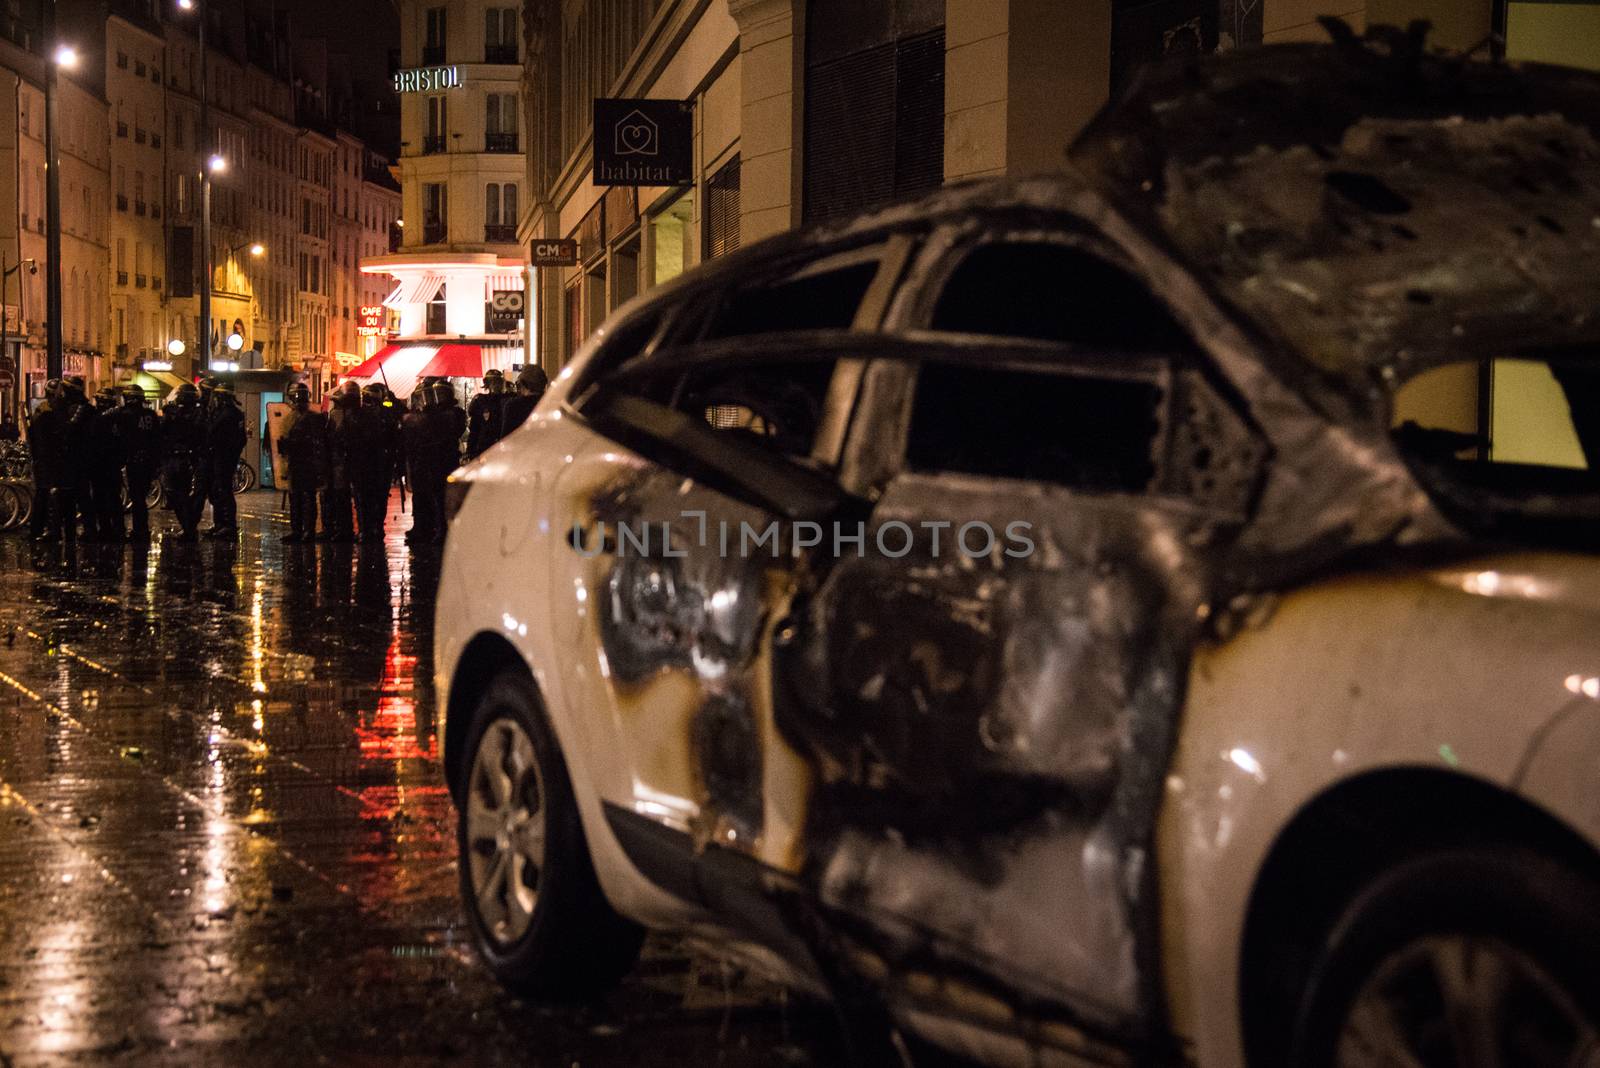 FRANCE, Paris: A burned down unmarked police vehicle is pictured near the Place de la République in Paris following violent protests during rally by the Nuit Debout (Up All Night) movement, on April 23, 2016. The Nuit Debout or Up All Night protests began in opposition to the Socialist government's labour reforms seen as threatening workers' rights, but have since gathered a number of causes, from migrants' rights to anti-globalisation.